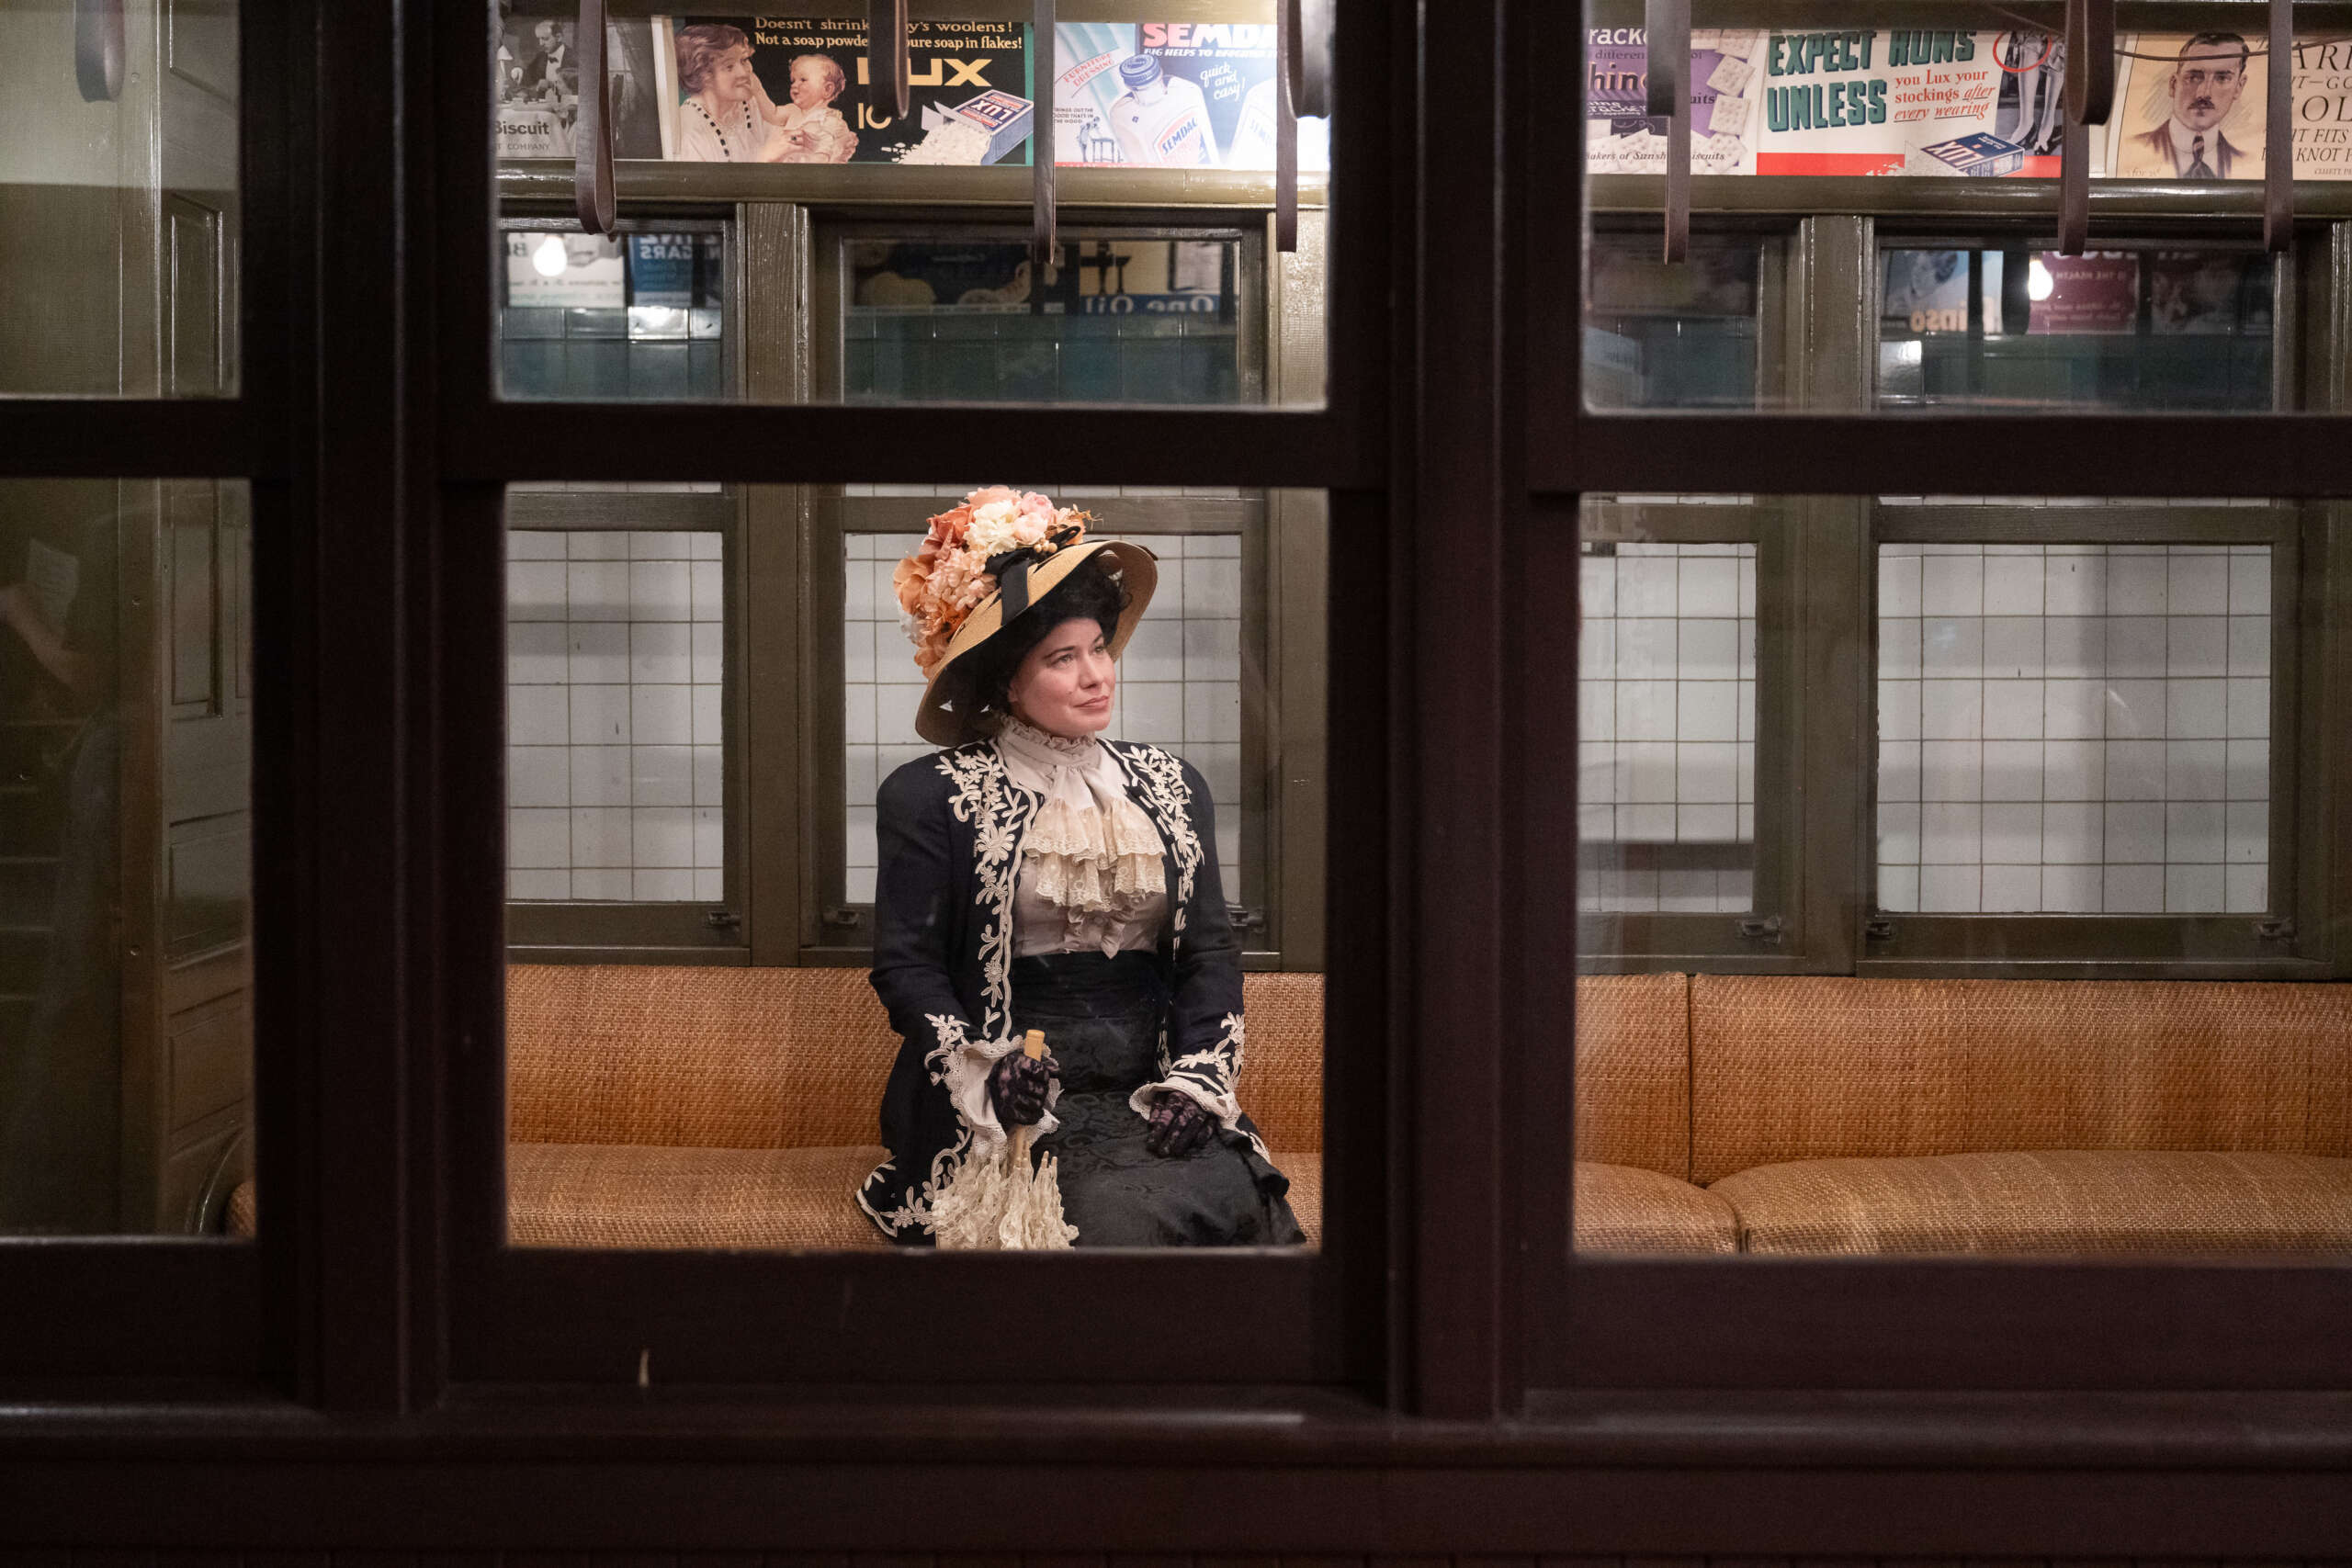 A woman dressed in early 1900s clothing sits in a vintage elevated train car.